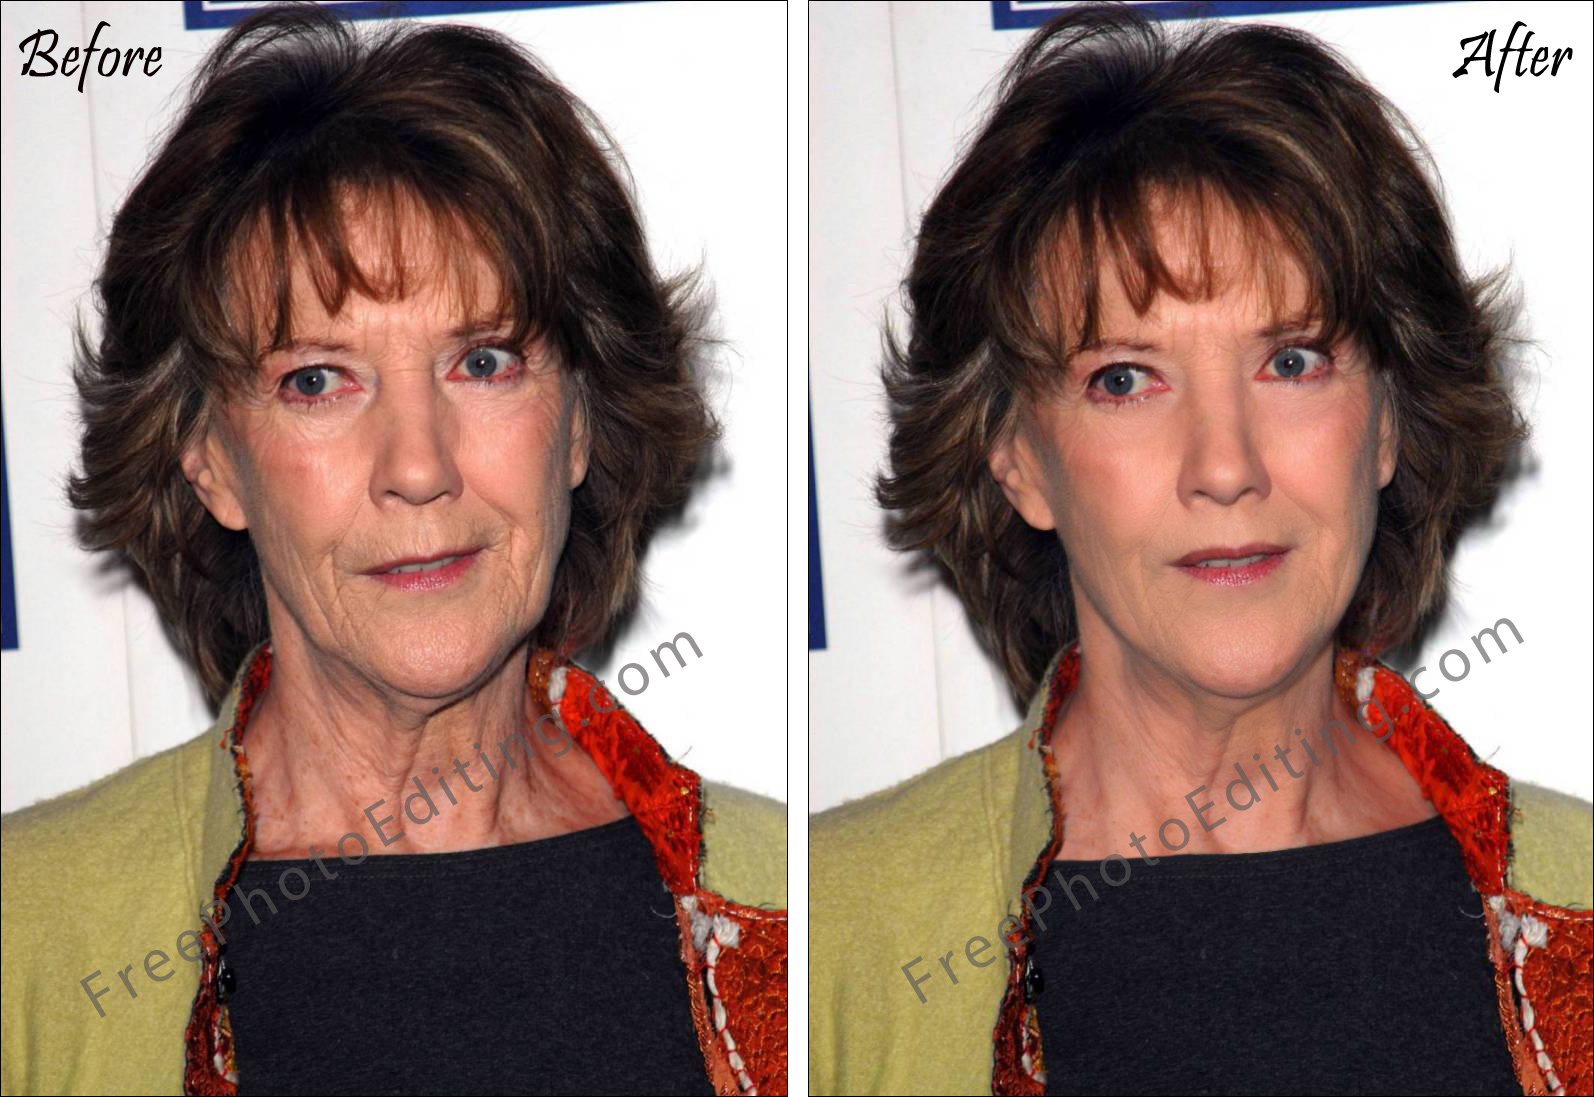 Skin retouching photo editing to remove wrinkles and sagging skin